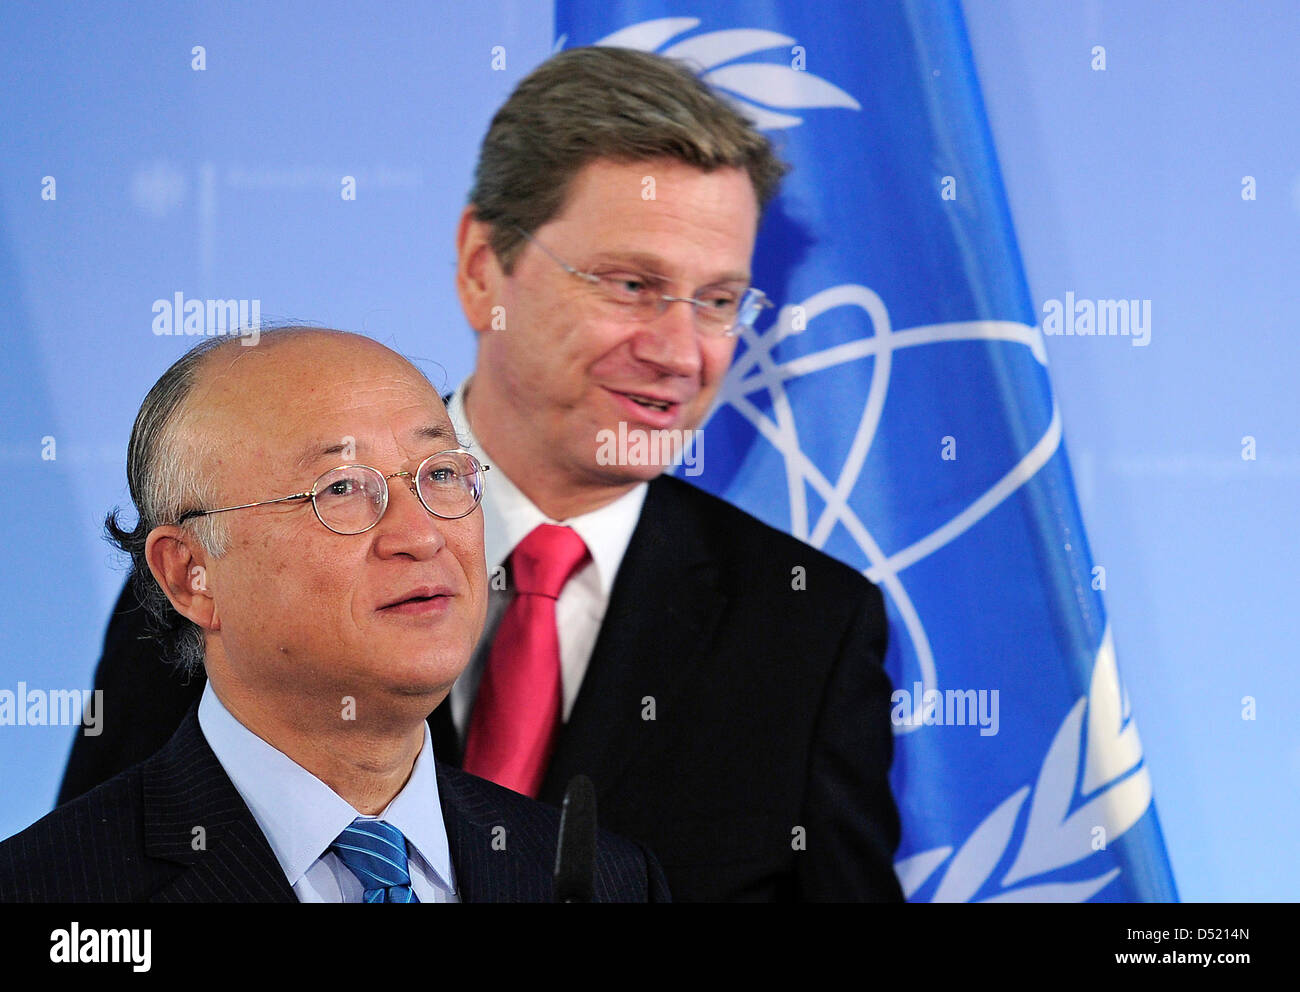 German Foreign Minister Guido Westerwelle (R) and International Atomic Energy Agency (IAEA) Director General Yukiya Amano (L) arrive for a press conference at the Foreign Office in Berlin, Germany, 08 October 2010. Both met for talks on the Iranian nuclear weapons programme. Photo: HANNIBAL Stock Photo